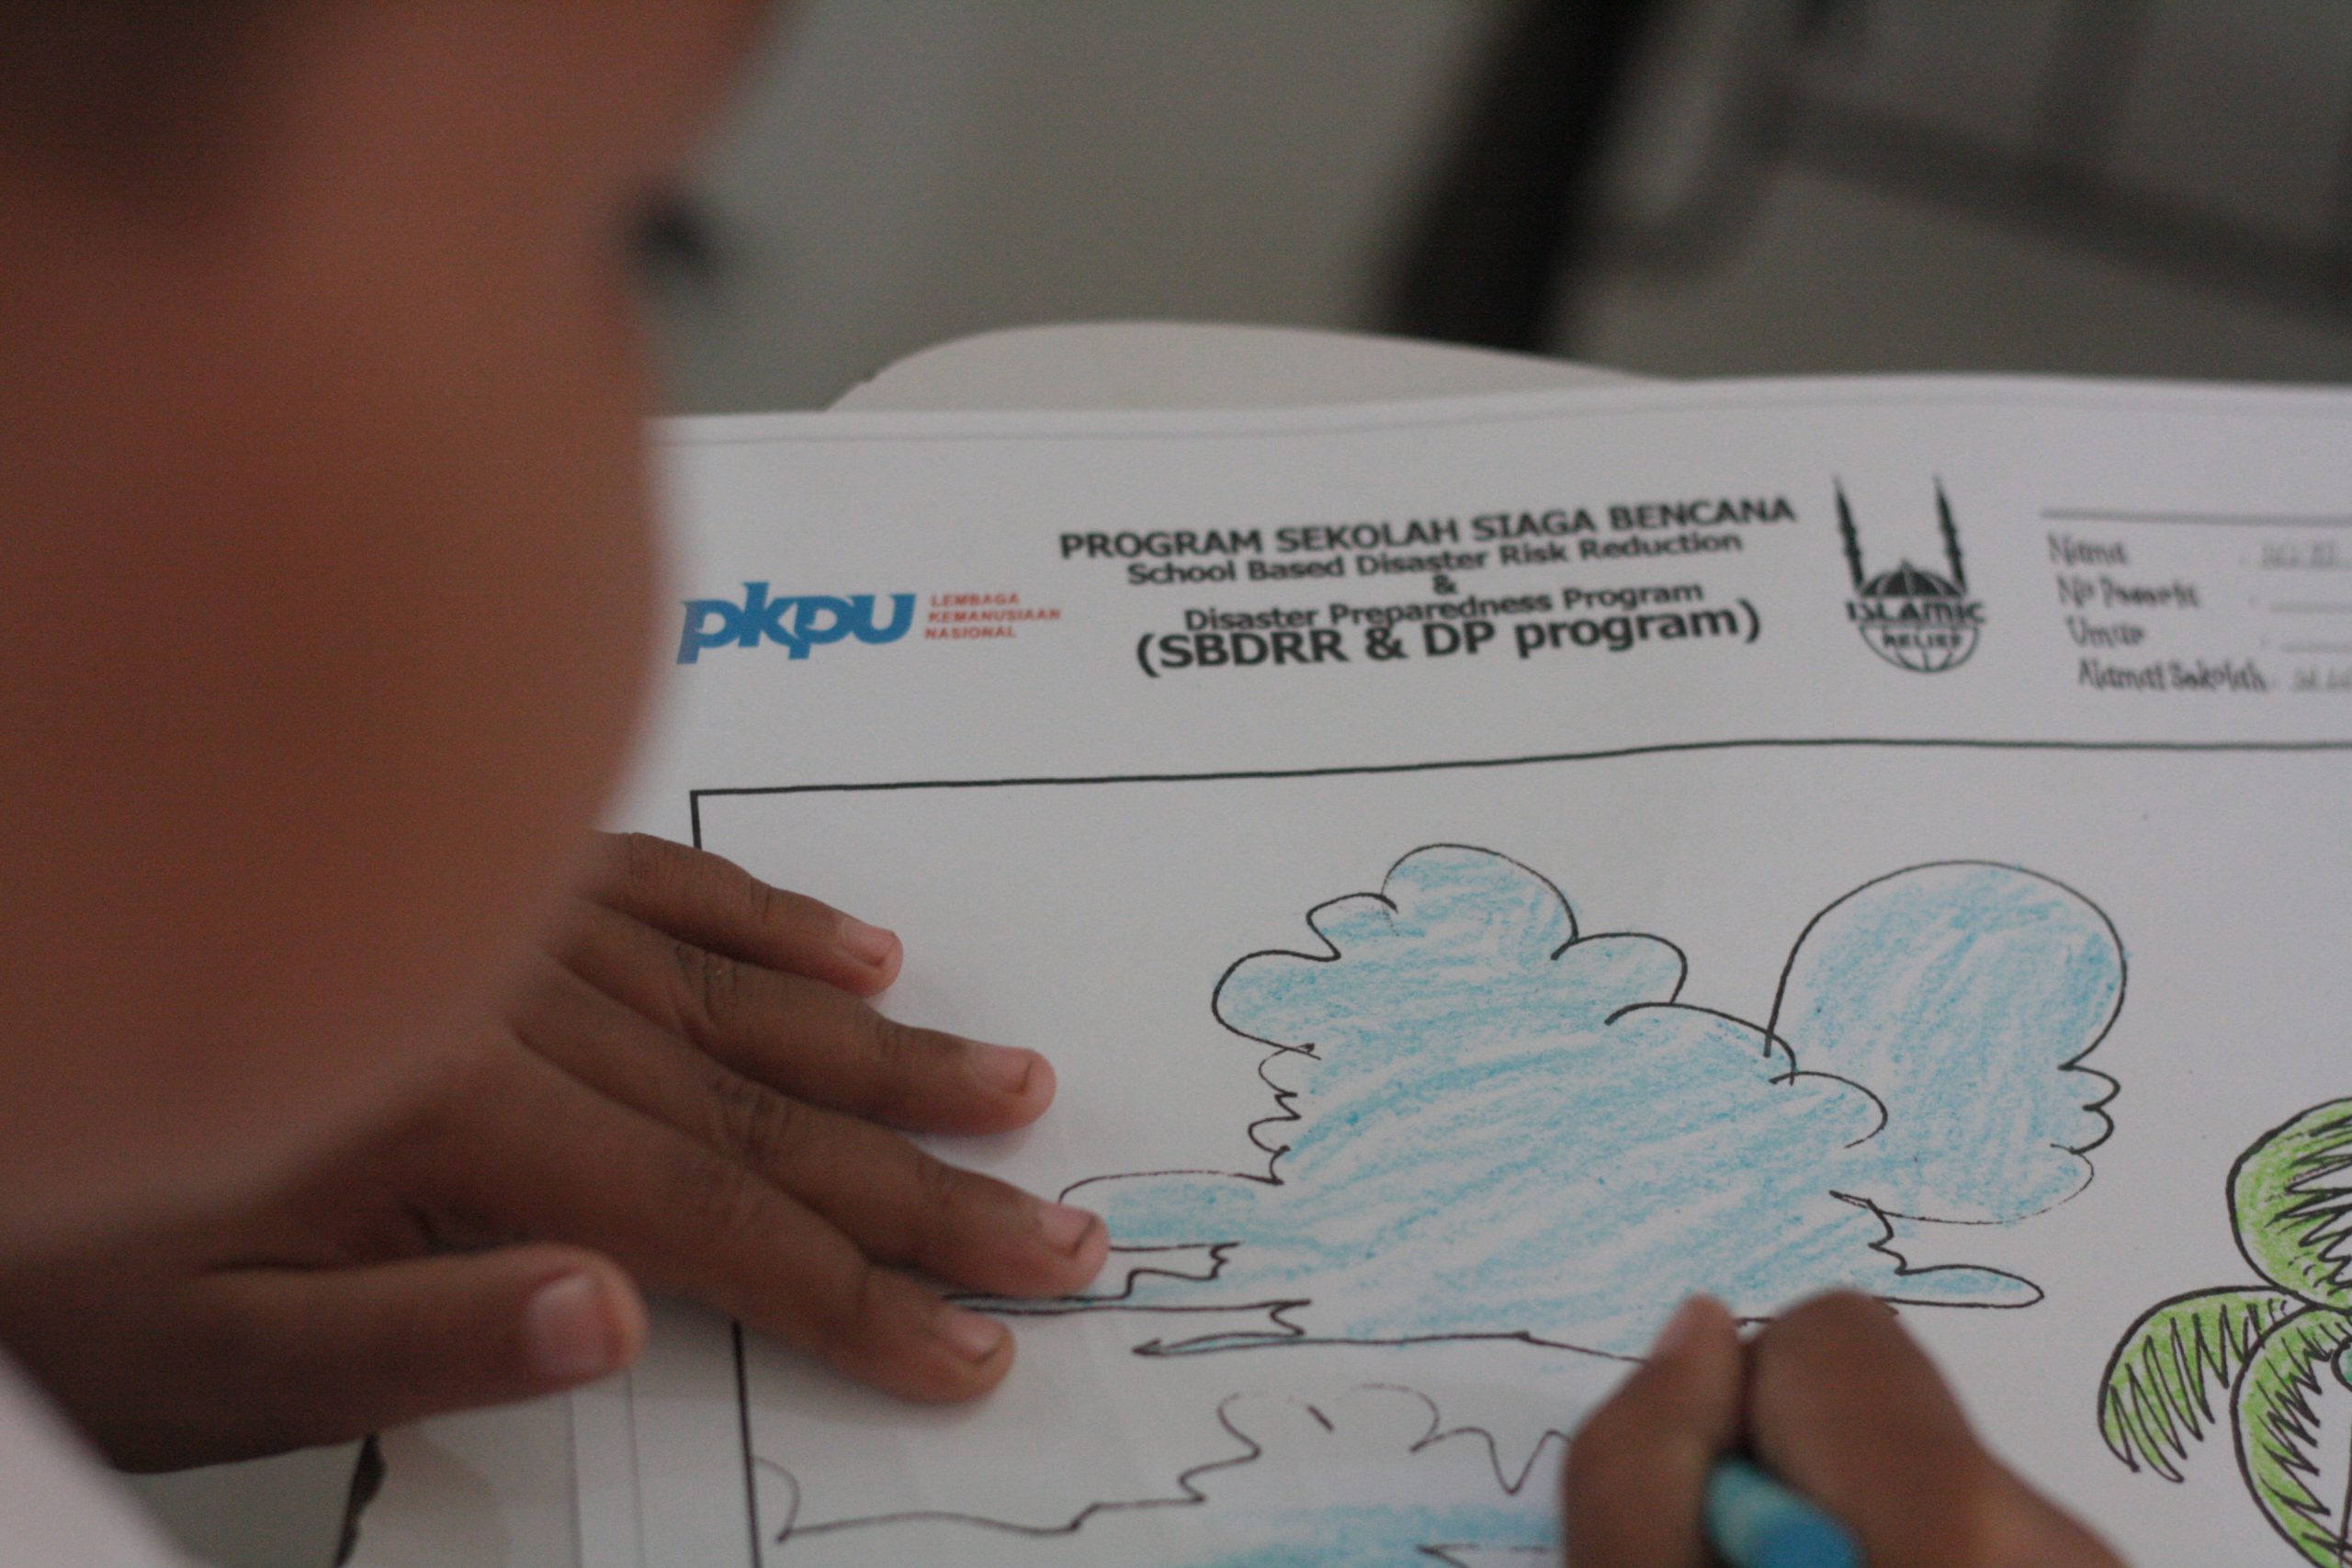 Disaster risk reduction training in Indonesian schools